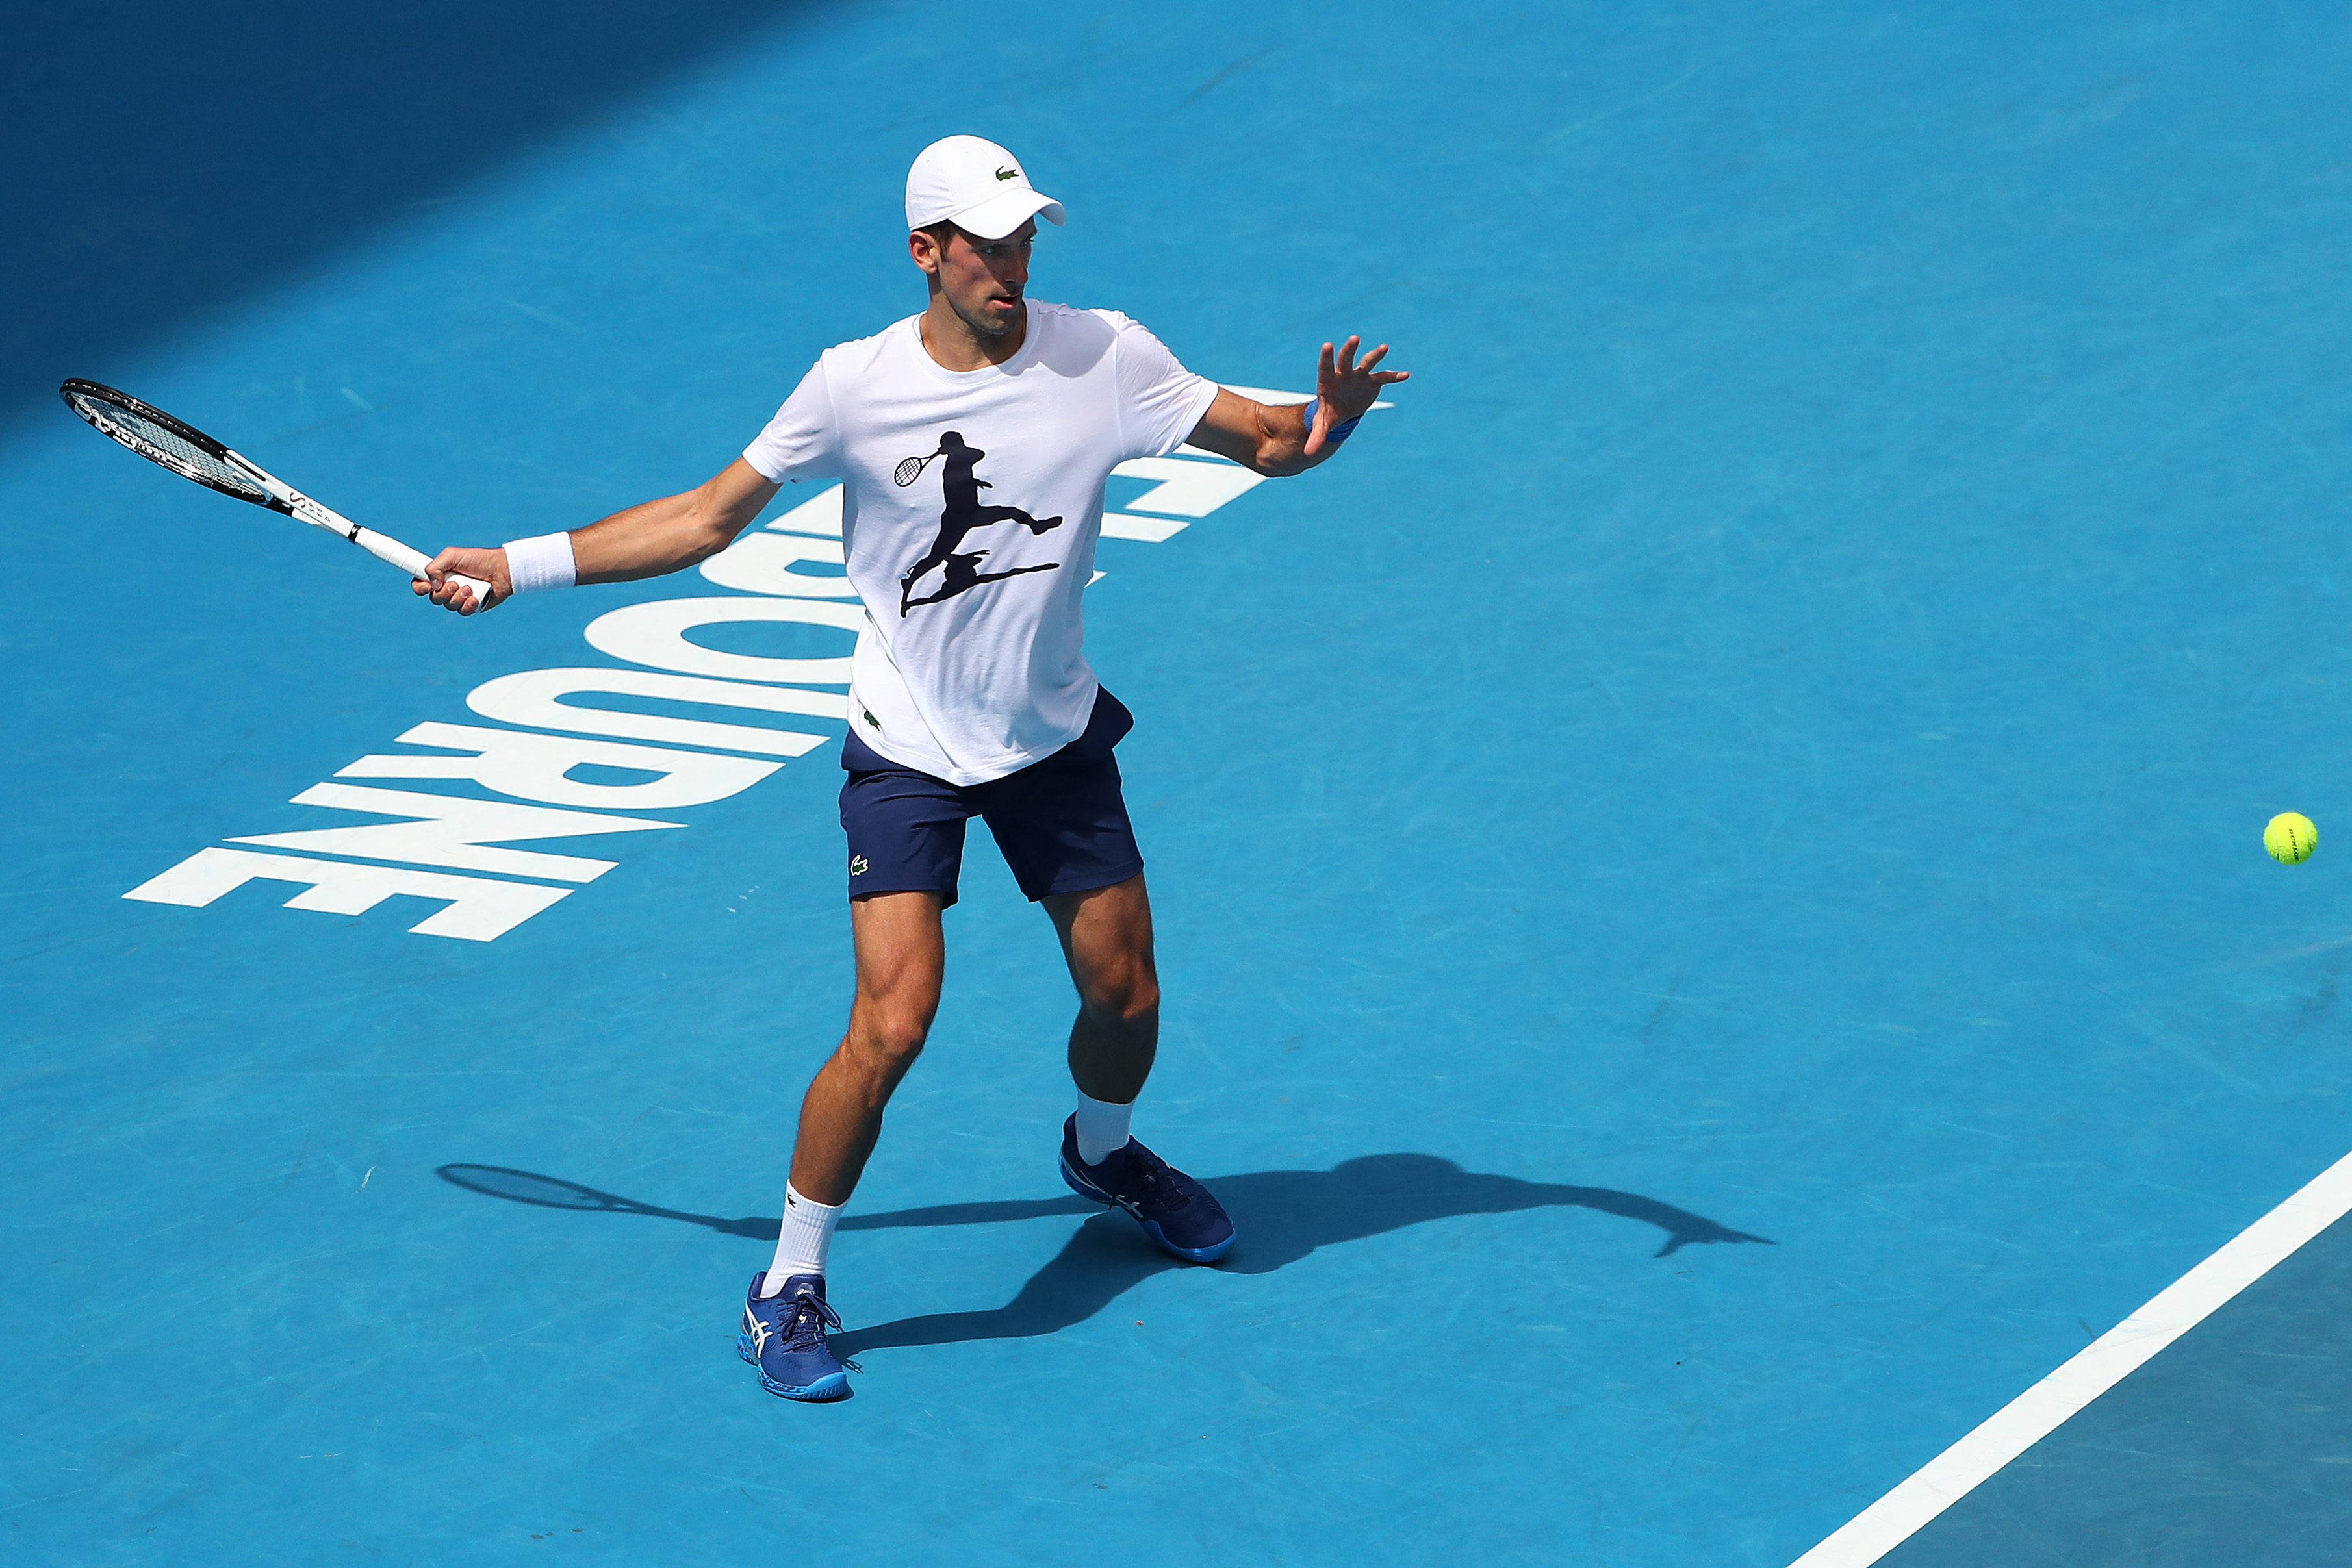 Serbia's Novak Djokovic takes part in a training session in Melbourne ahead of the Australian Open tennis tournament on January 11, 2022, a day after a court overturned the Australian government's decision to cancel his visa on Covid-19 vaccination grounds. 